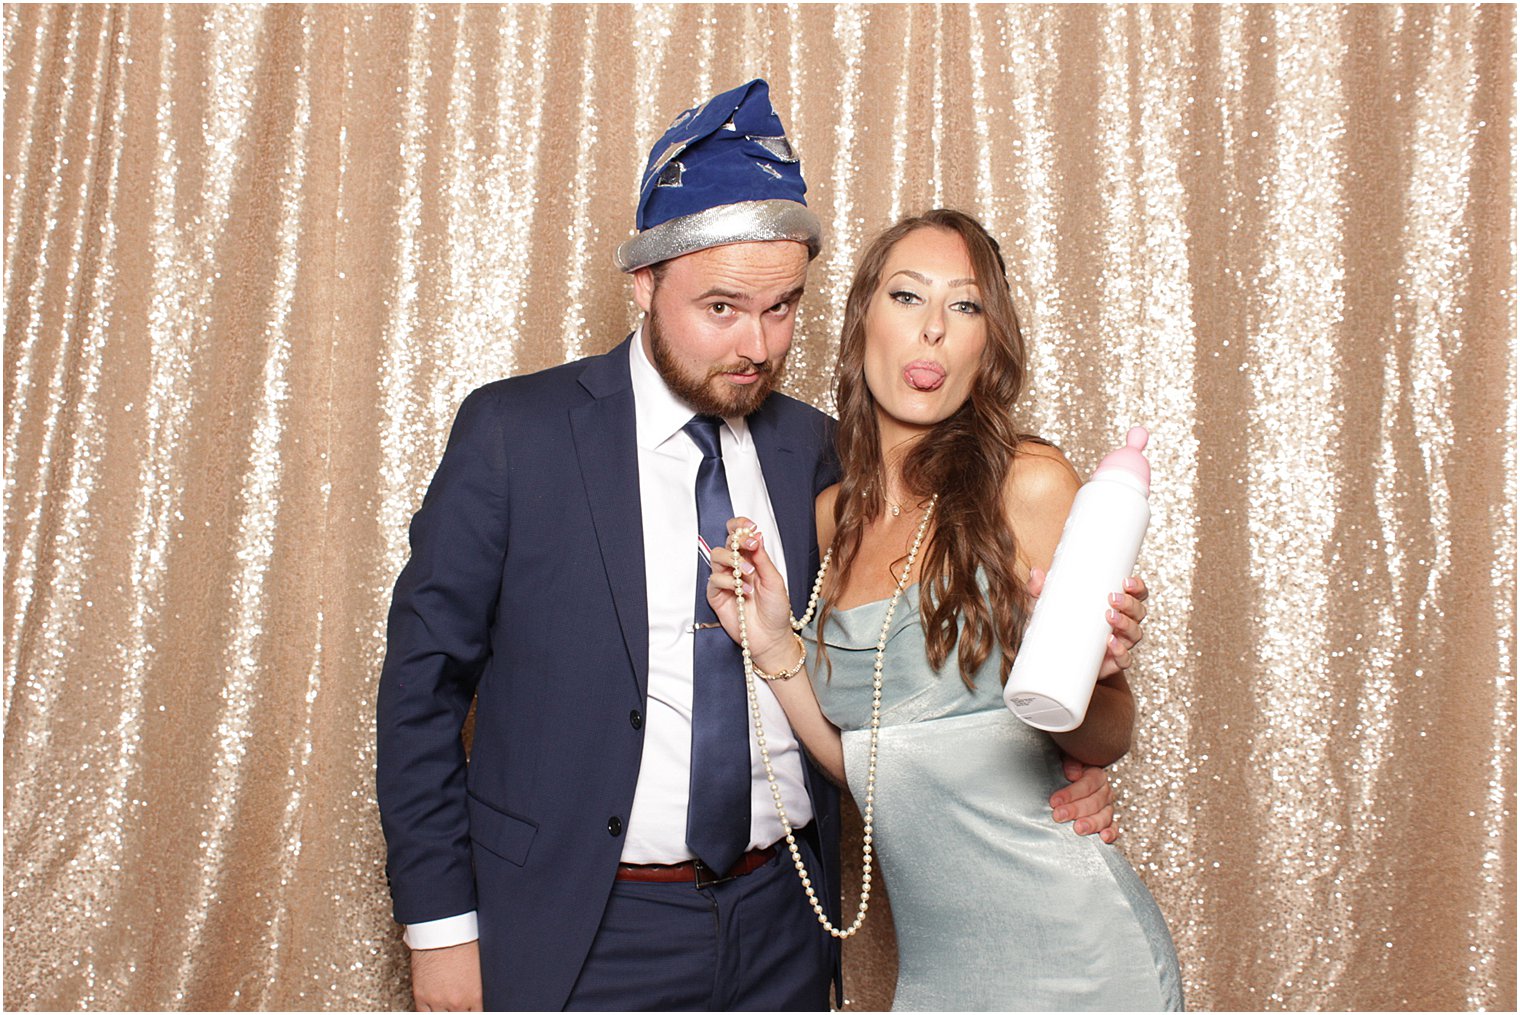 wedding guests have fun in NJ wedding reception photo booth